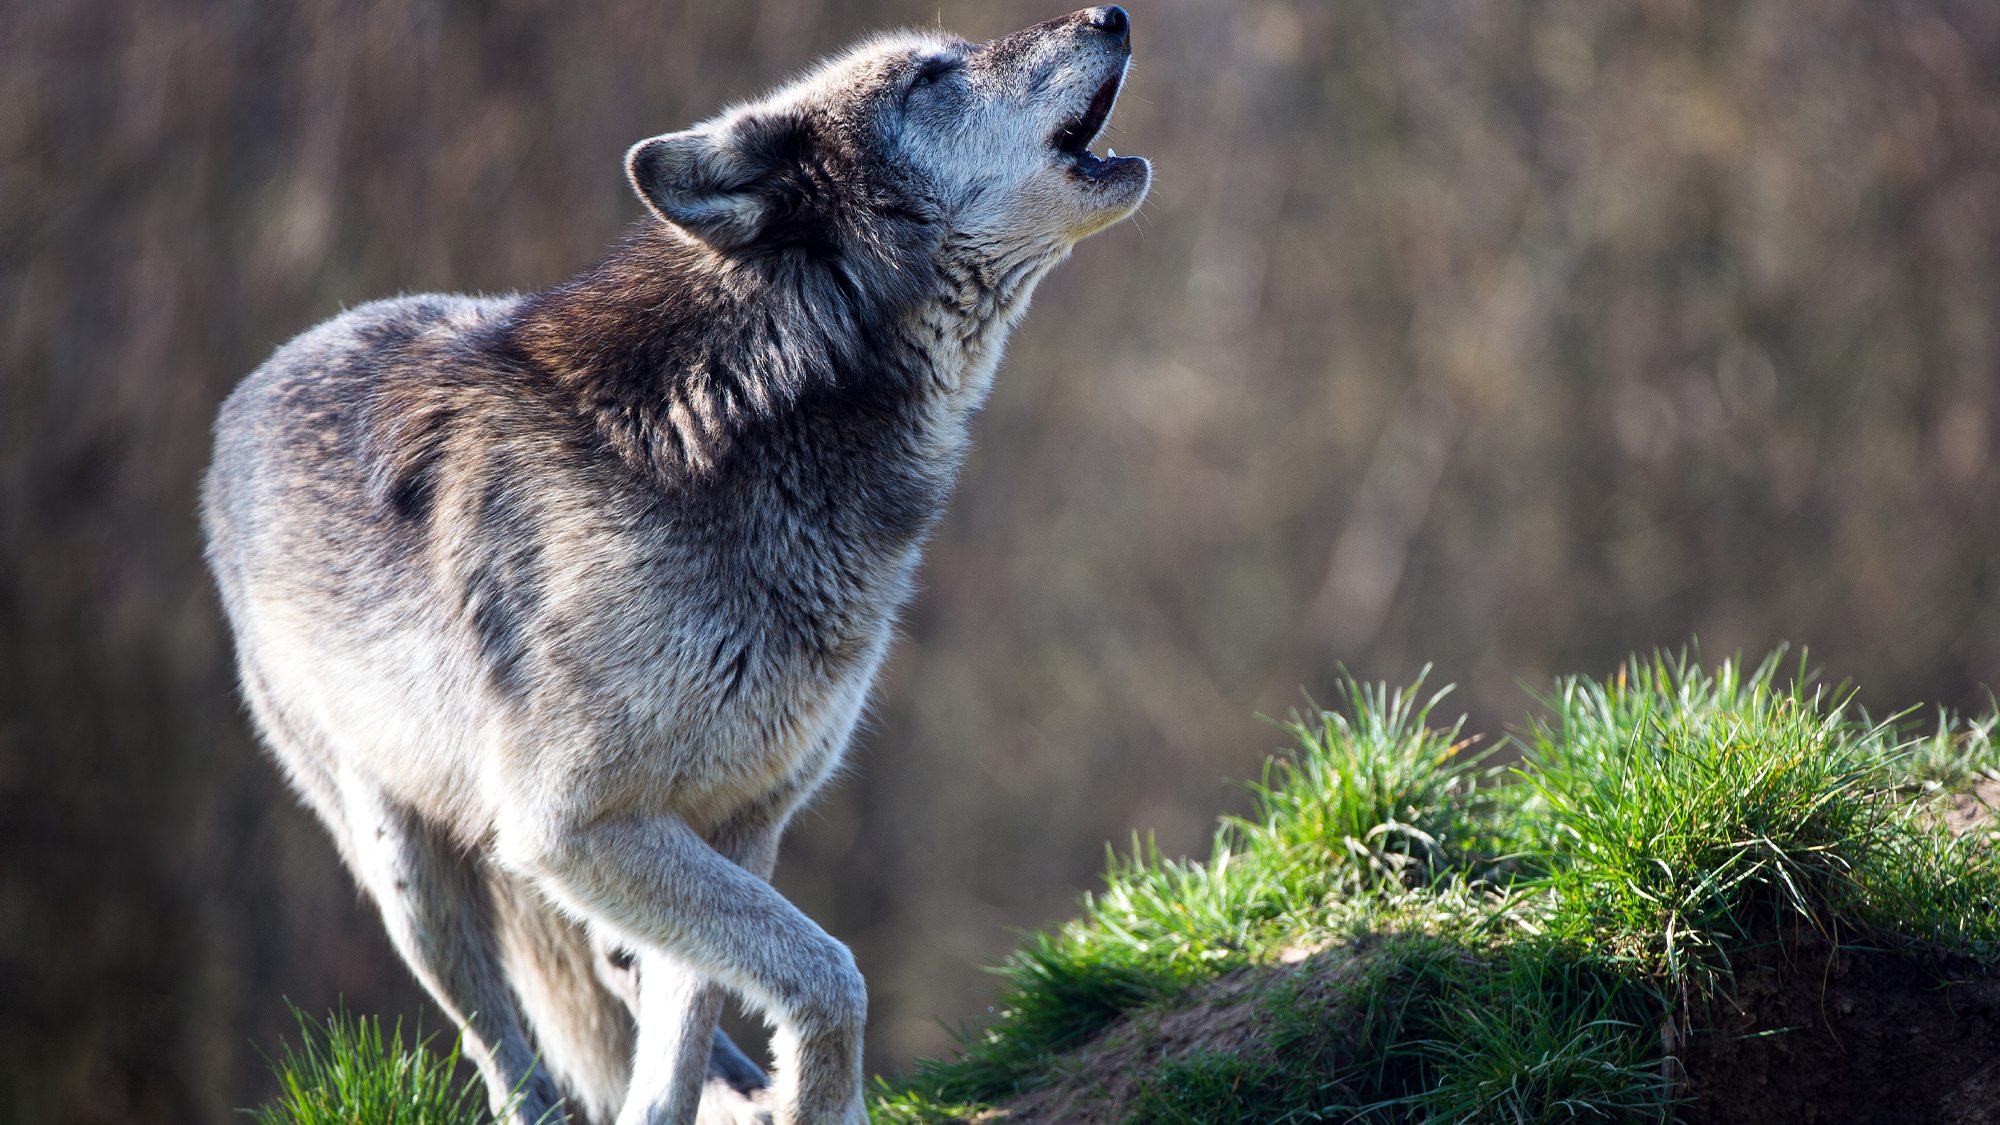 New pack of gray wolves confirmed in Northern California | Popular Science